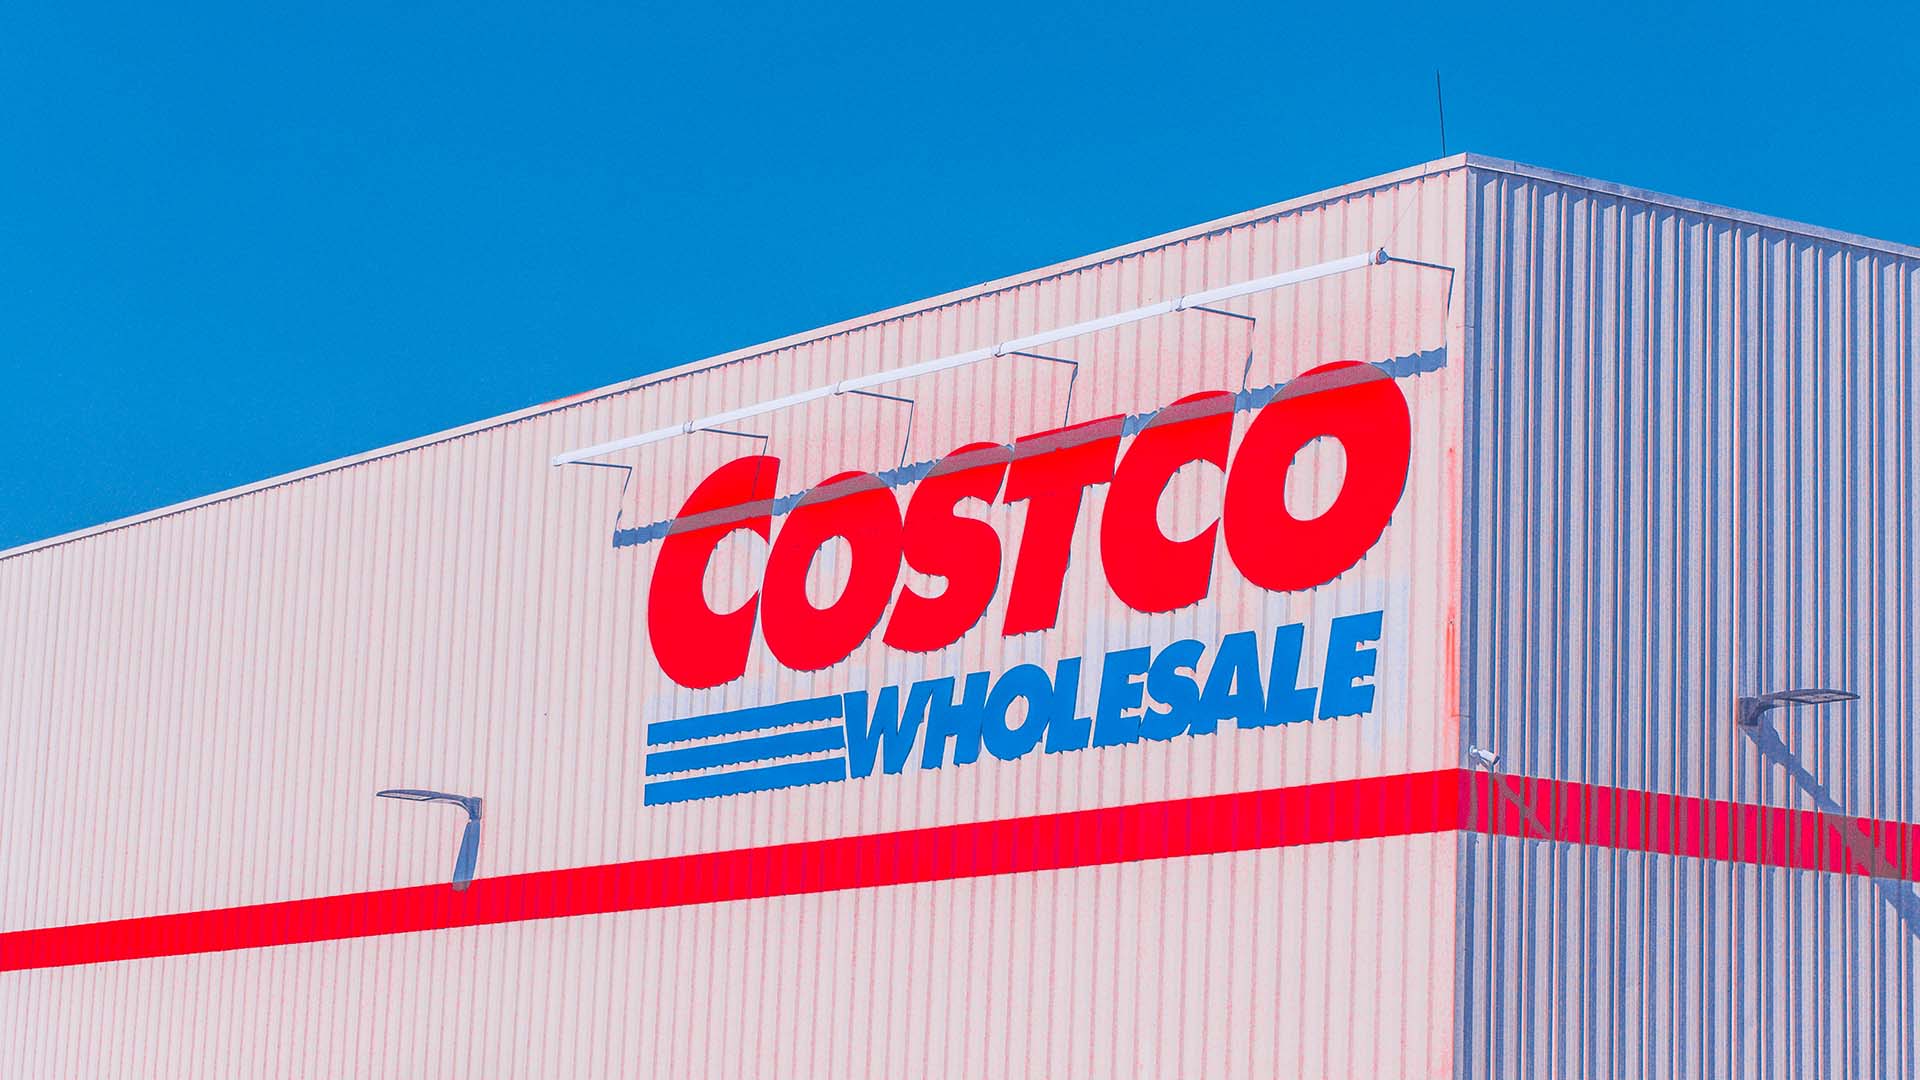 Can You Go To Costco If You Forgot Your Membership Card?